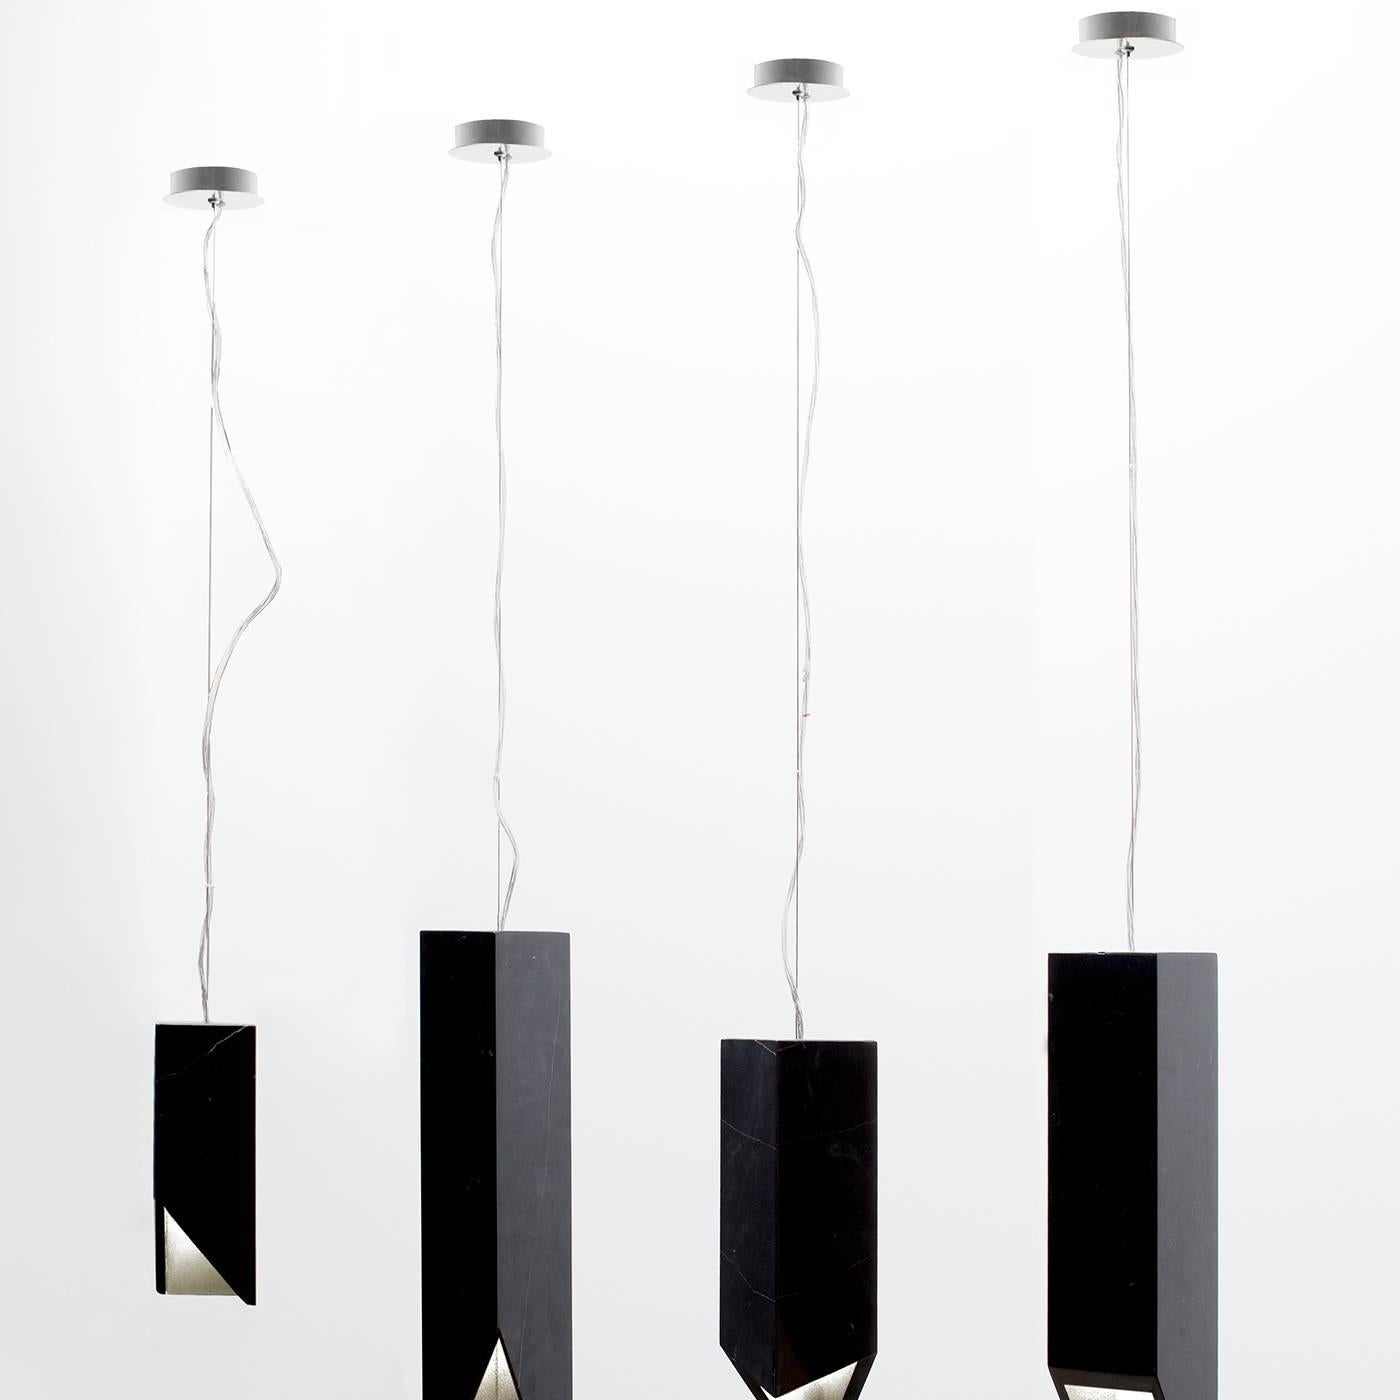 Designed by Joe Gentile and Fabio Crippa of Studio ADL, this ceiling lamp was named after one of the most influential Renaissance sculptors. The simple lines and harmonious proportions of the piece recall the grace of classical proportions, while